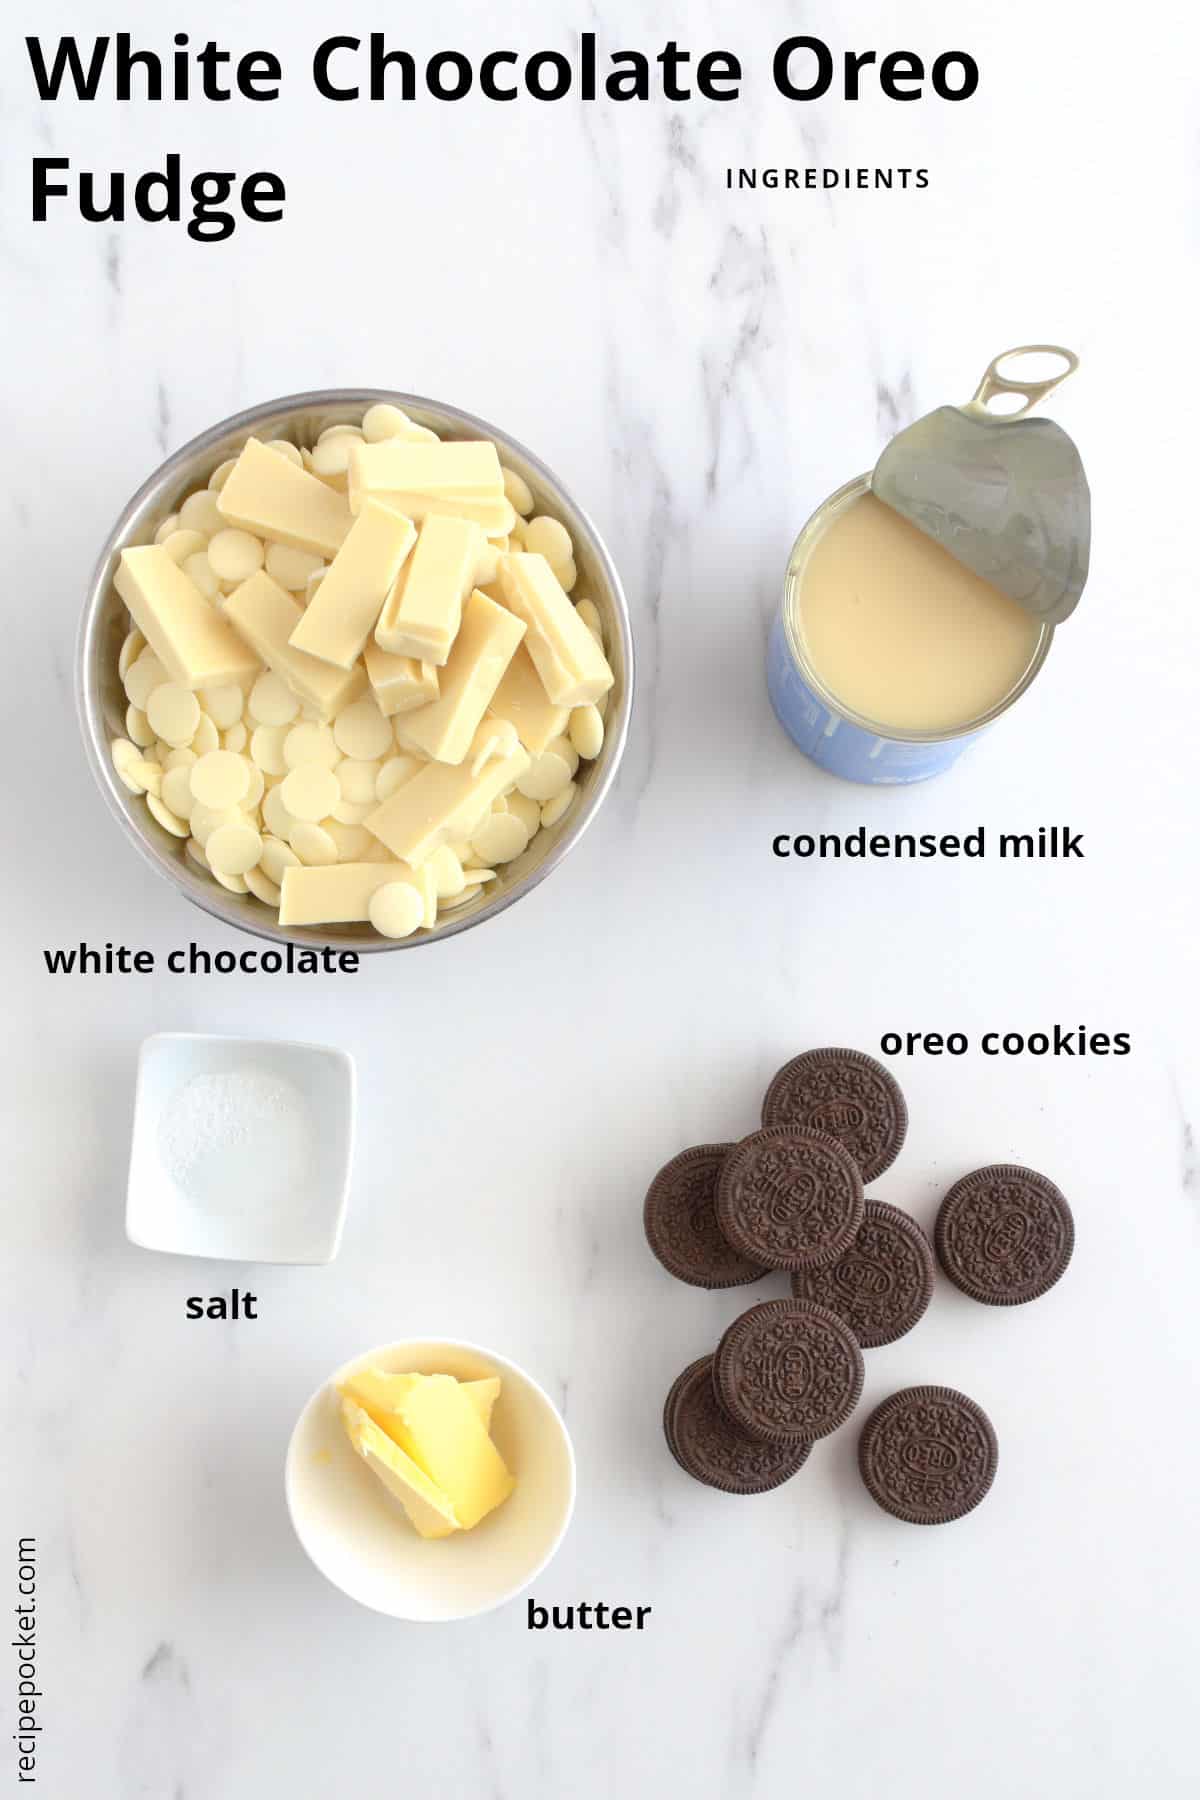 Image of ingredients needed to make white chocolate fudge with Oreo cookies.